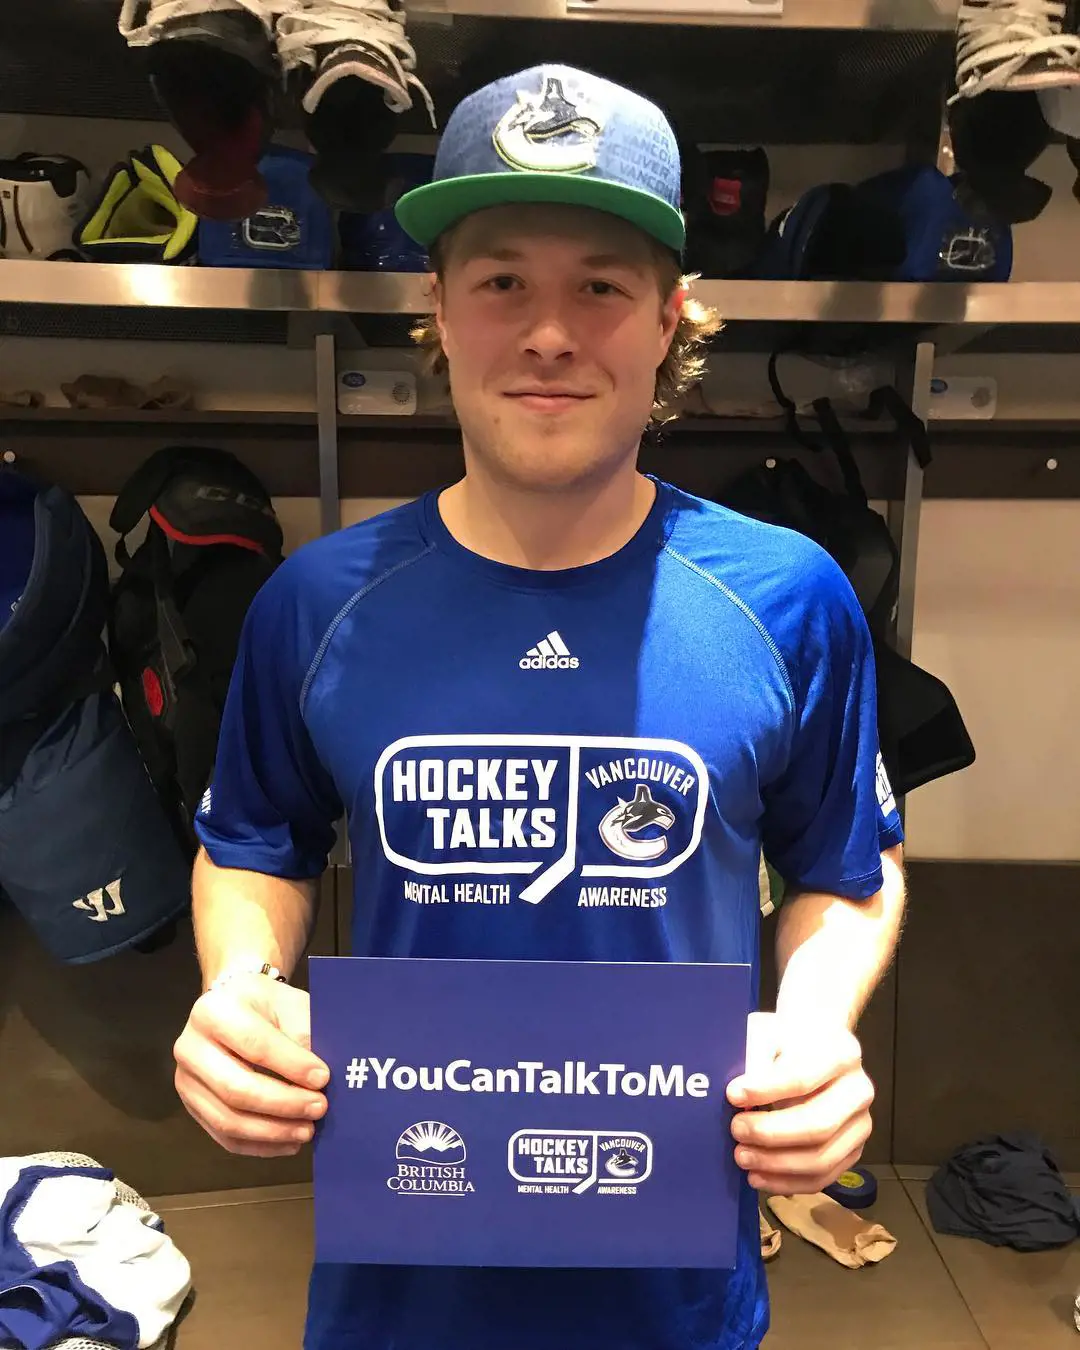 Canucks' right-wing Brock Boeser mostly wears Adidas clothing during his play and media appearances.